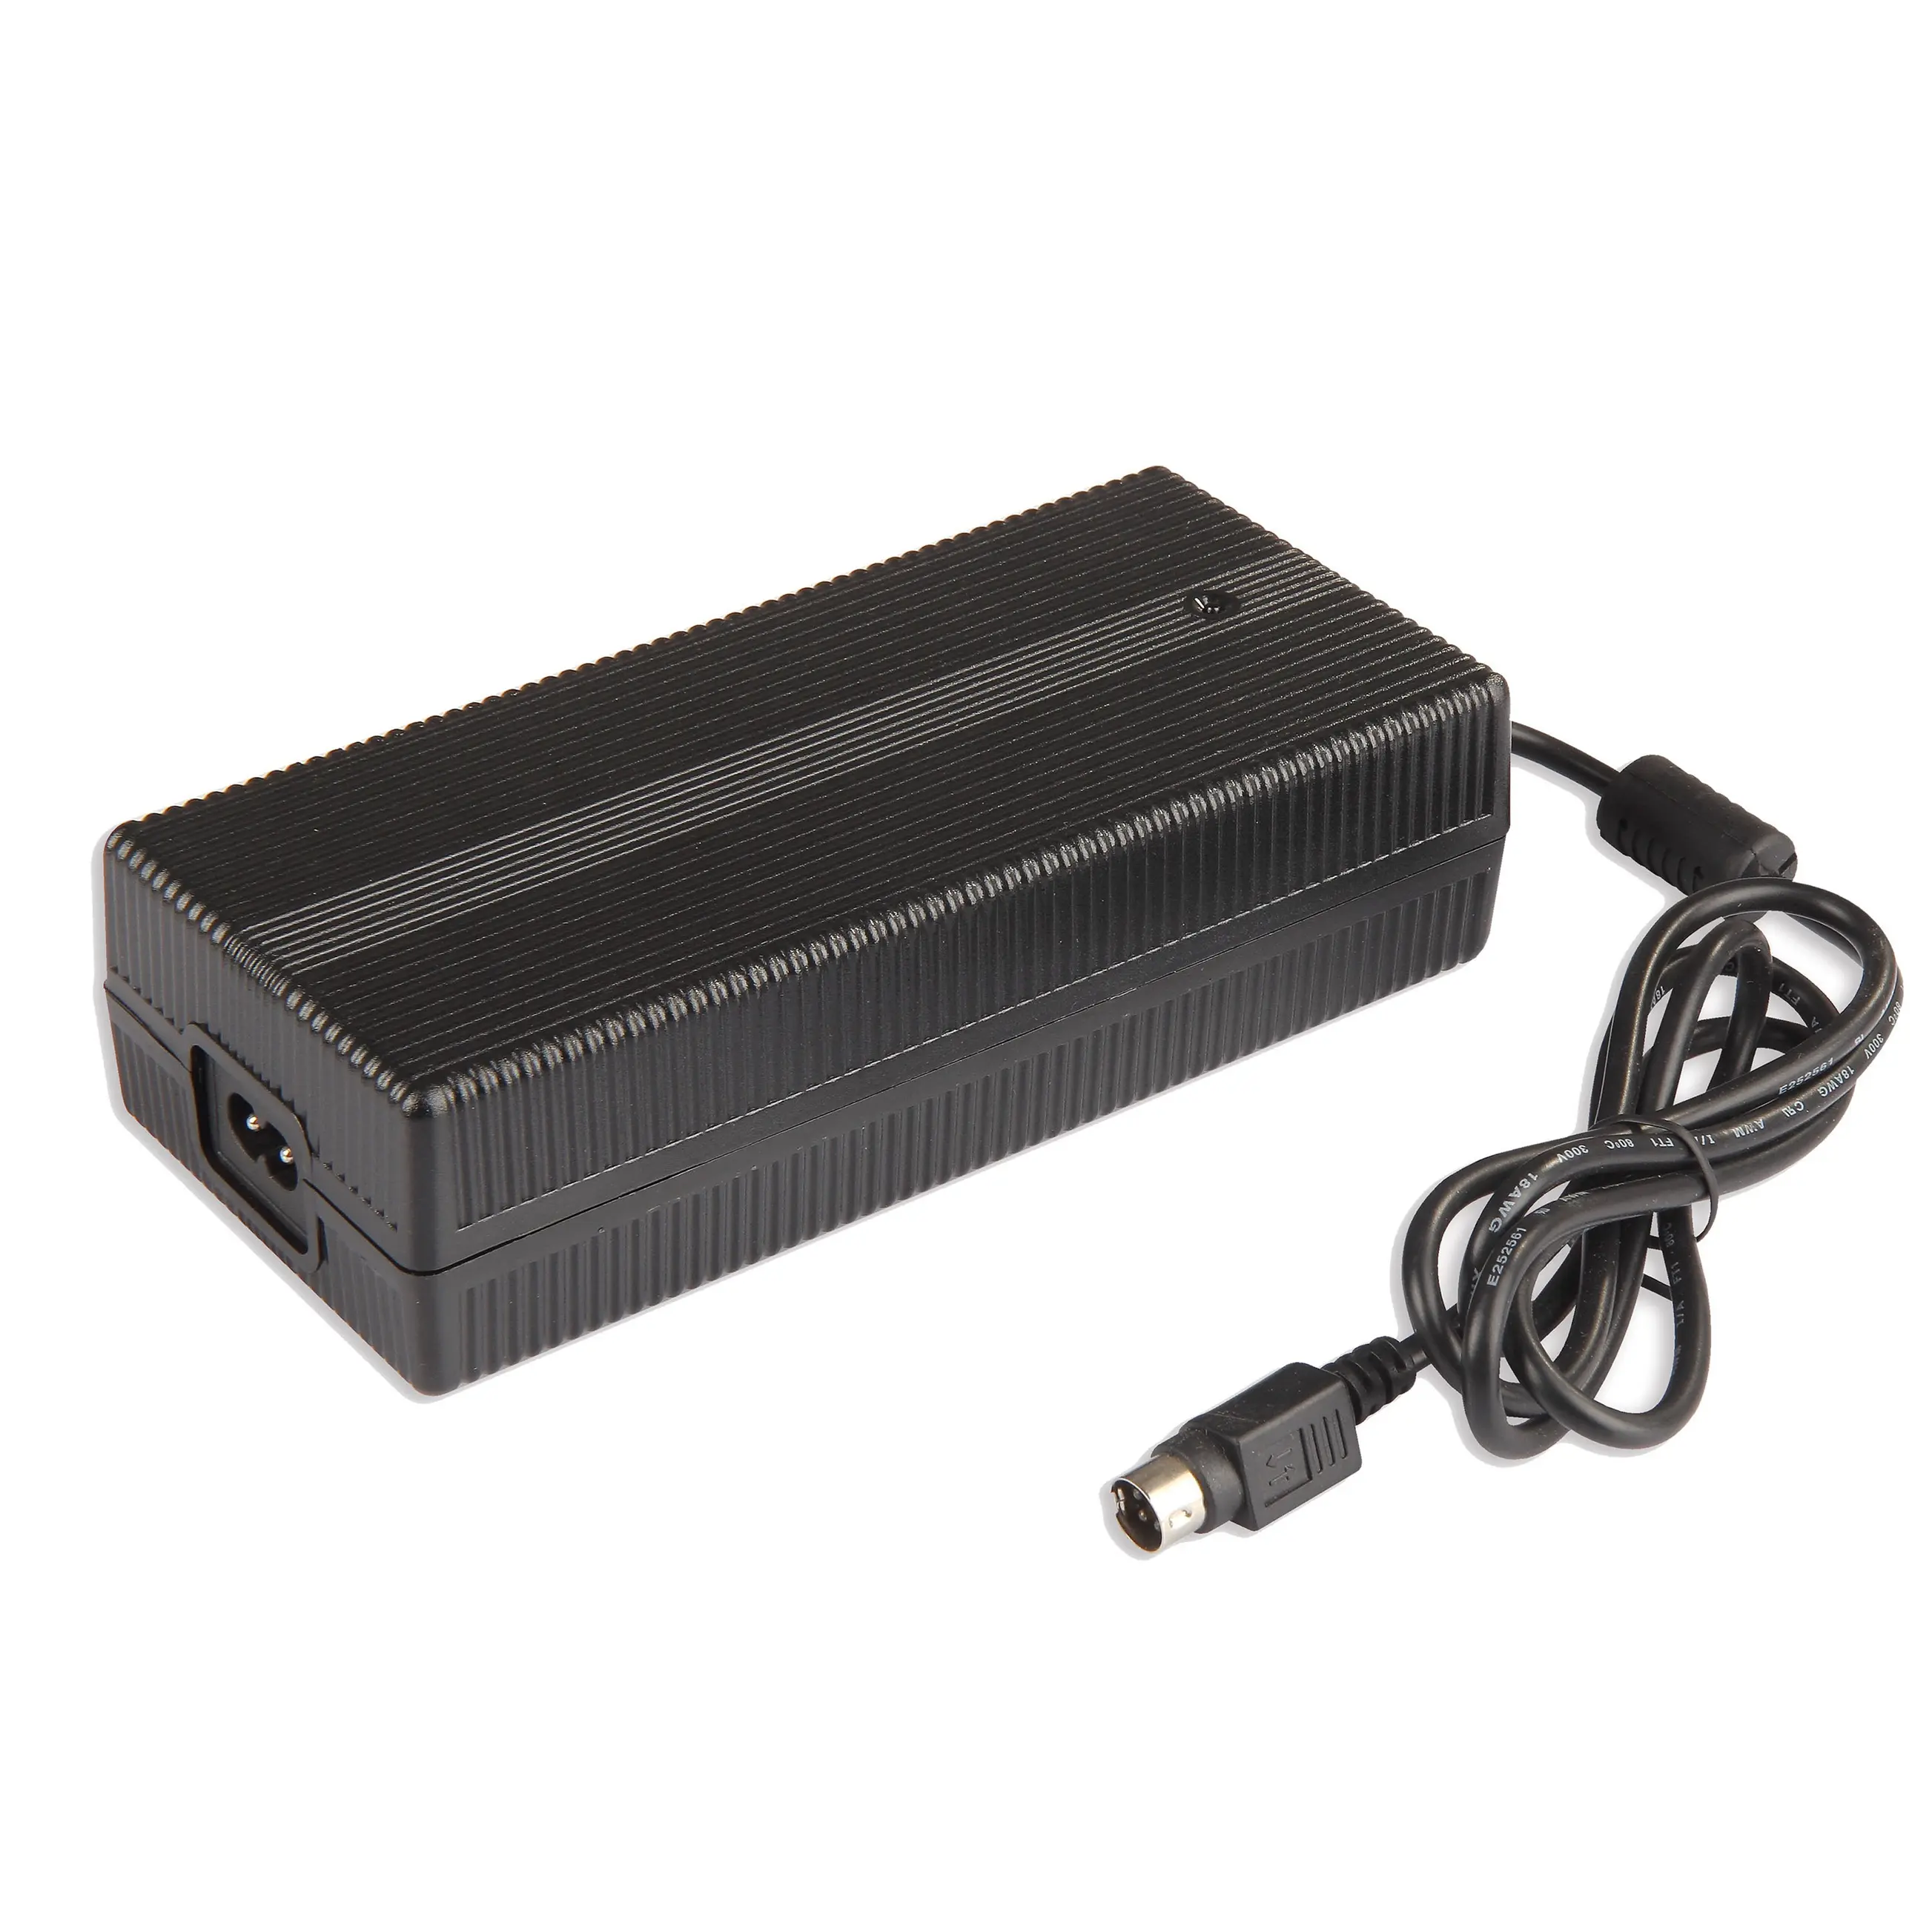 Fuyuan IEC EN UL approved AC DC switching power supply 24V 24vdc 7.5a power adapter 24v 6.25a